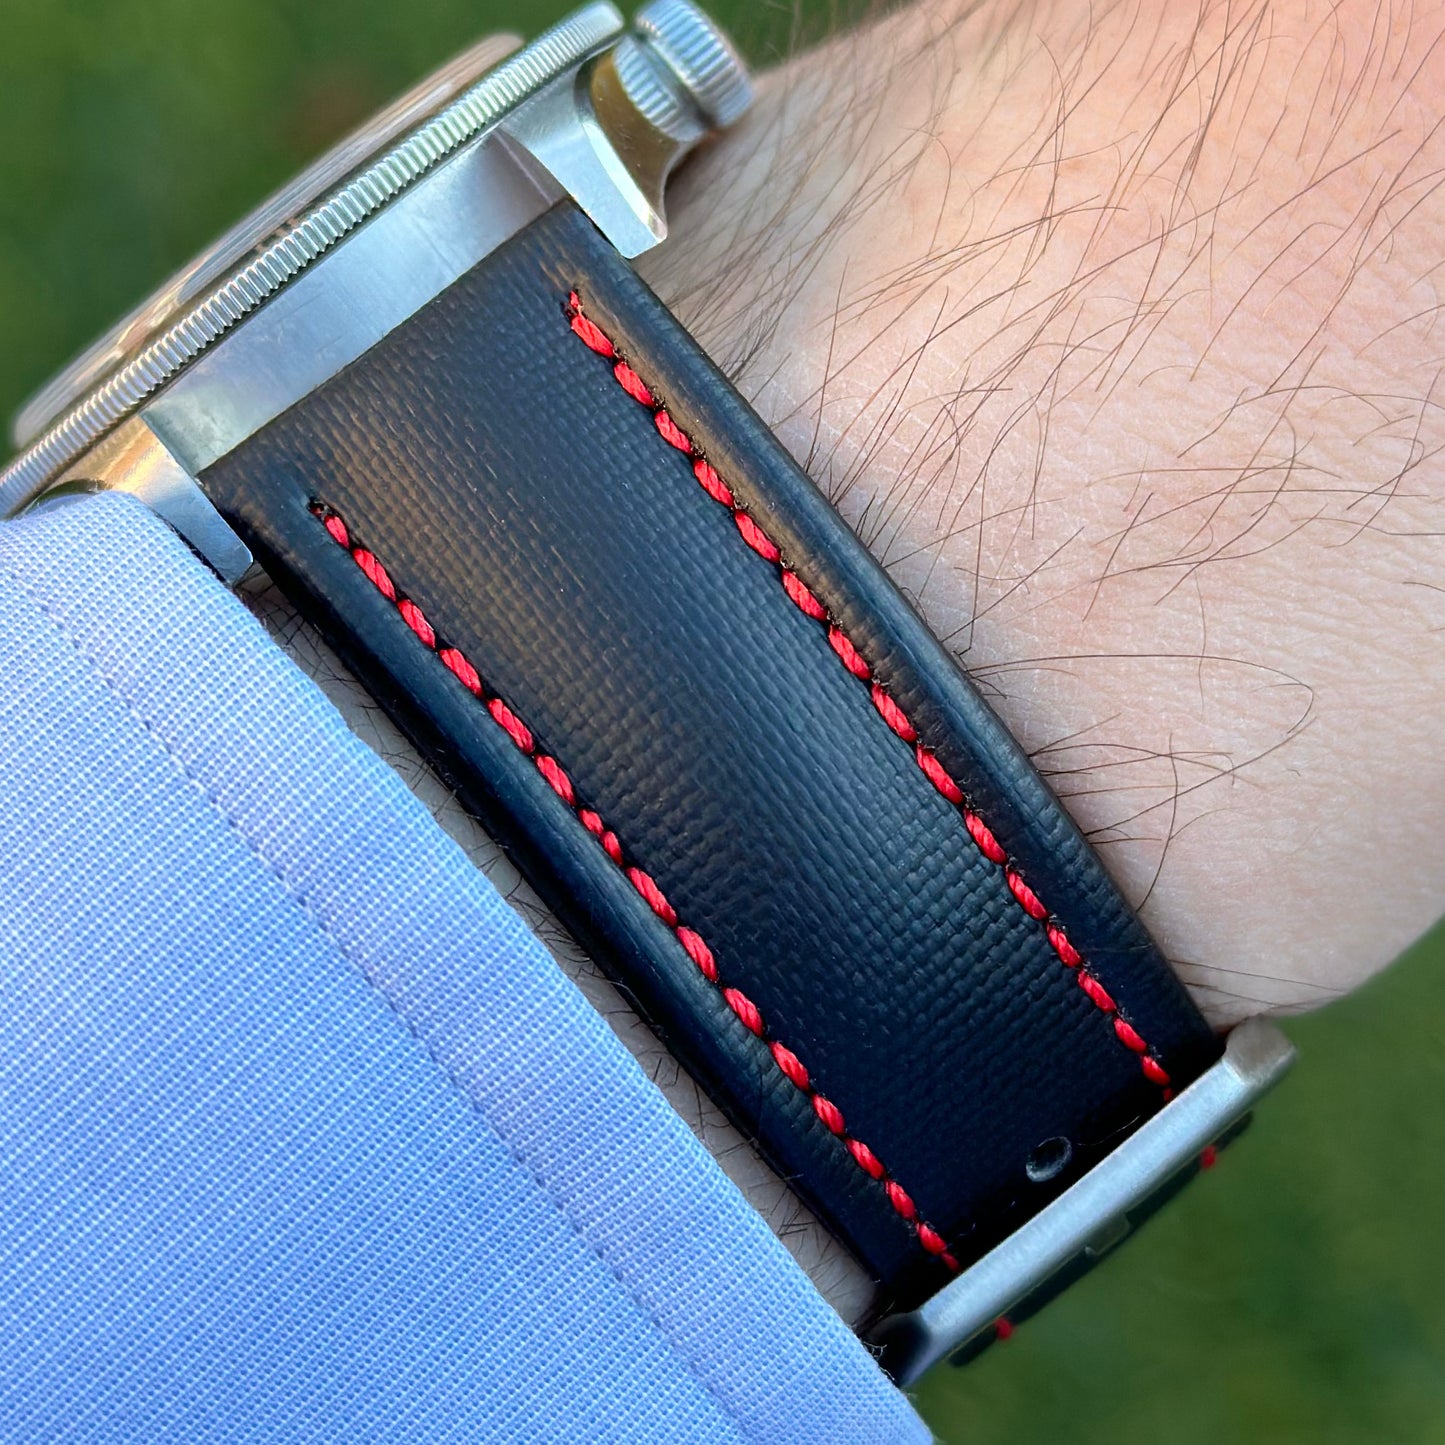 The Bermuda: Jet Black Sail Cloth Watch Strap With Contrast Red Stitching